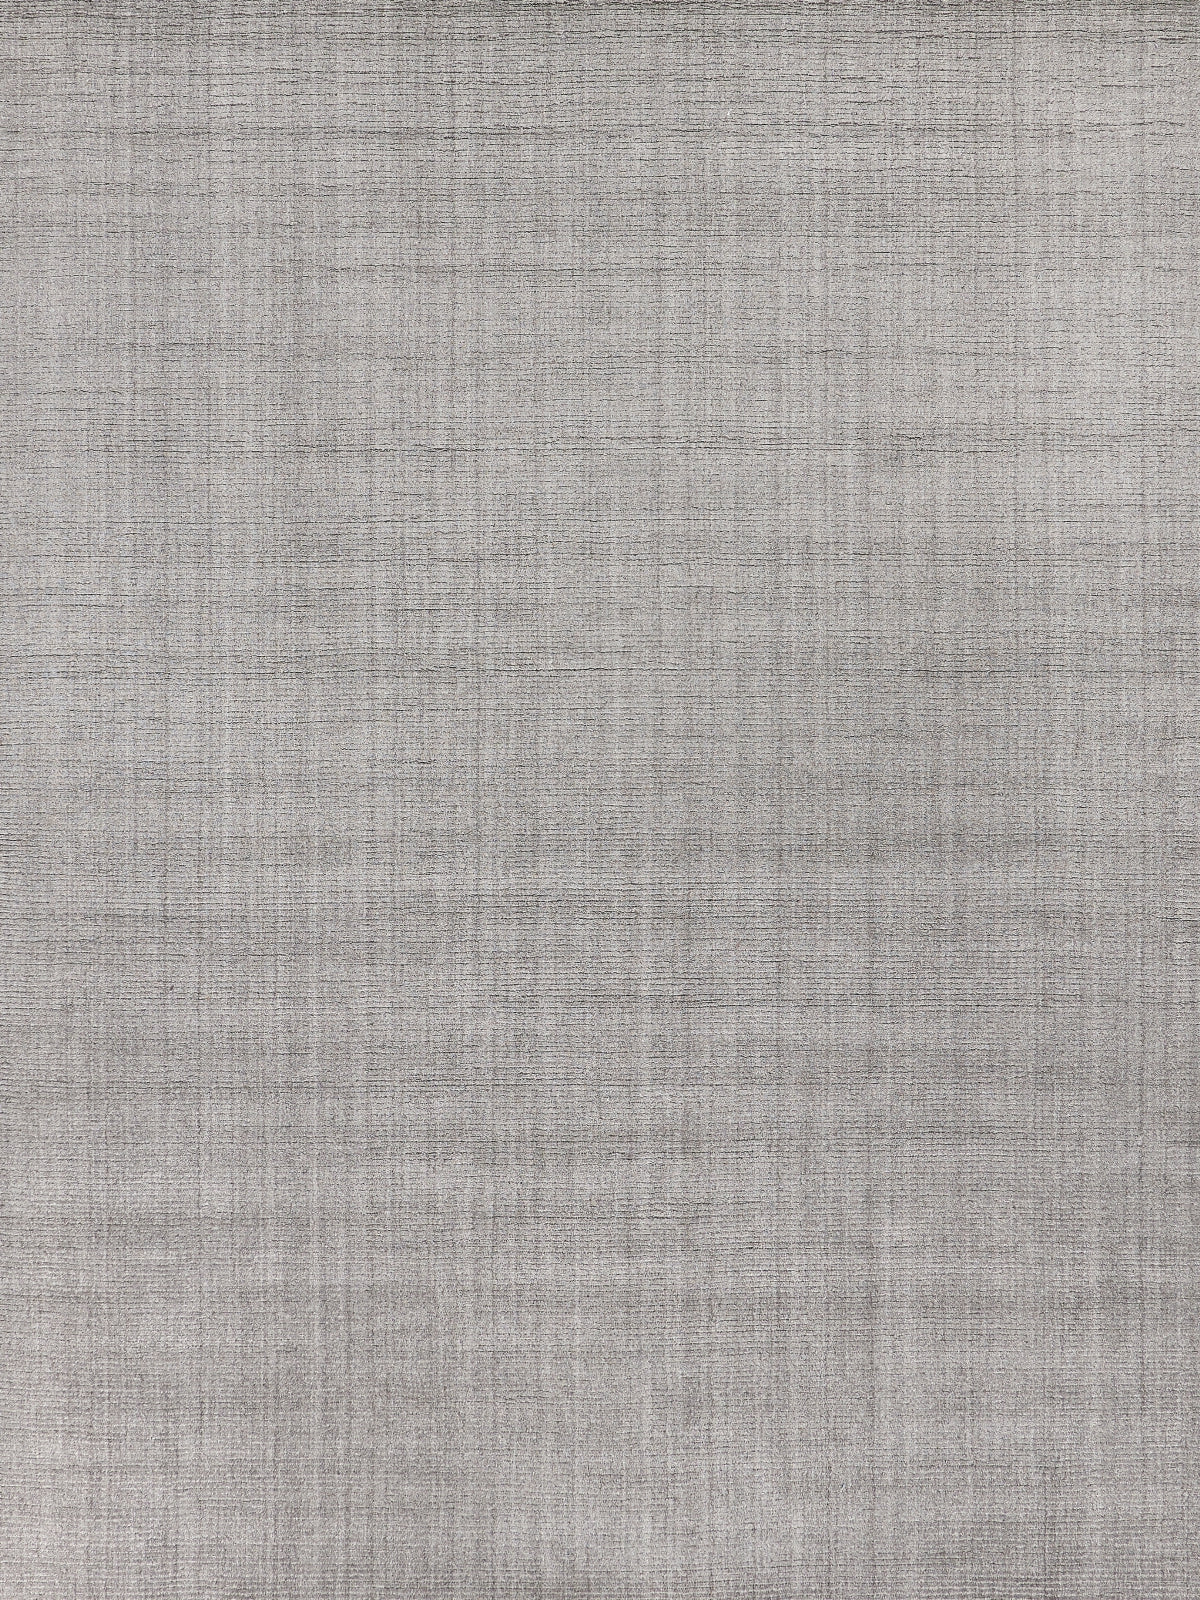 Exquisite Rugs Robin 3779 Pewter Area Rug